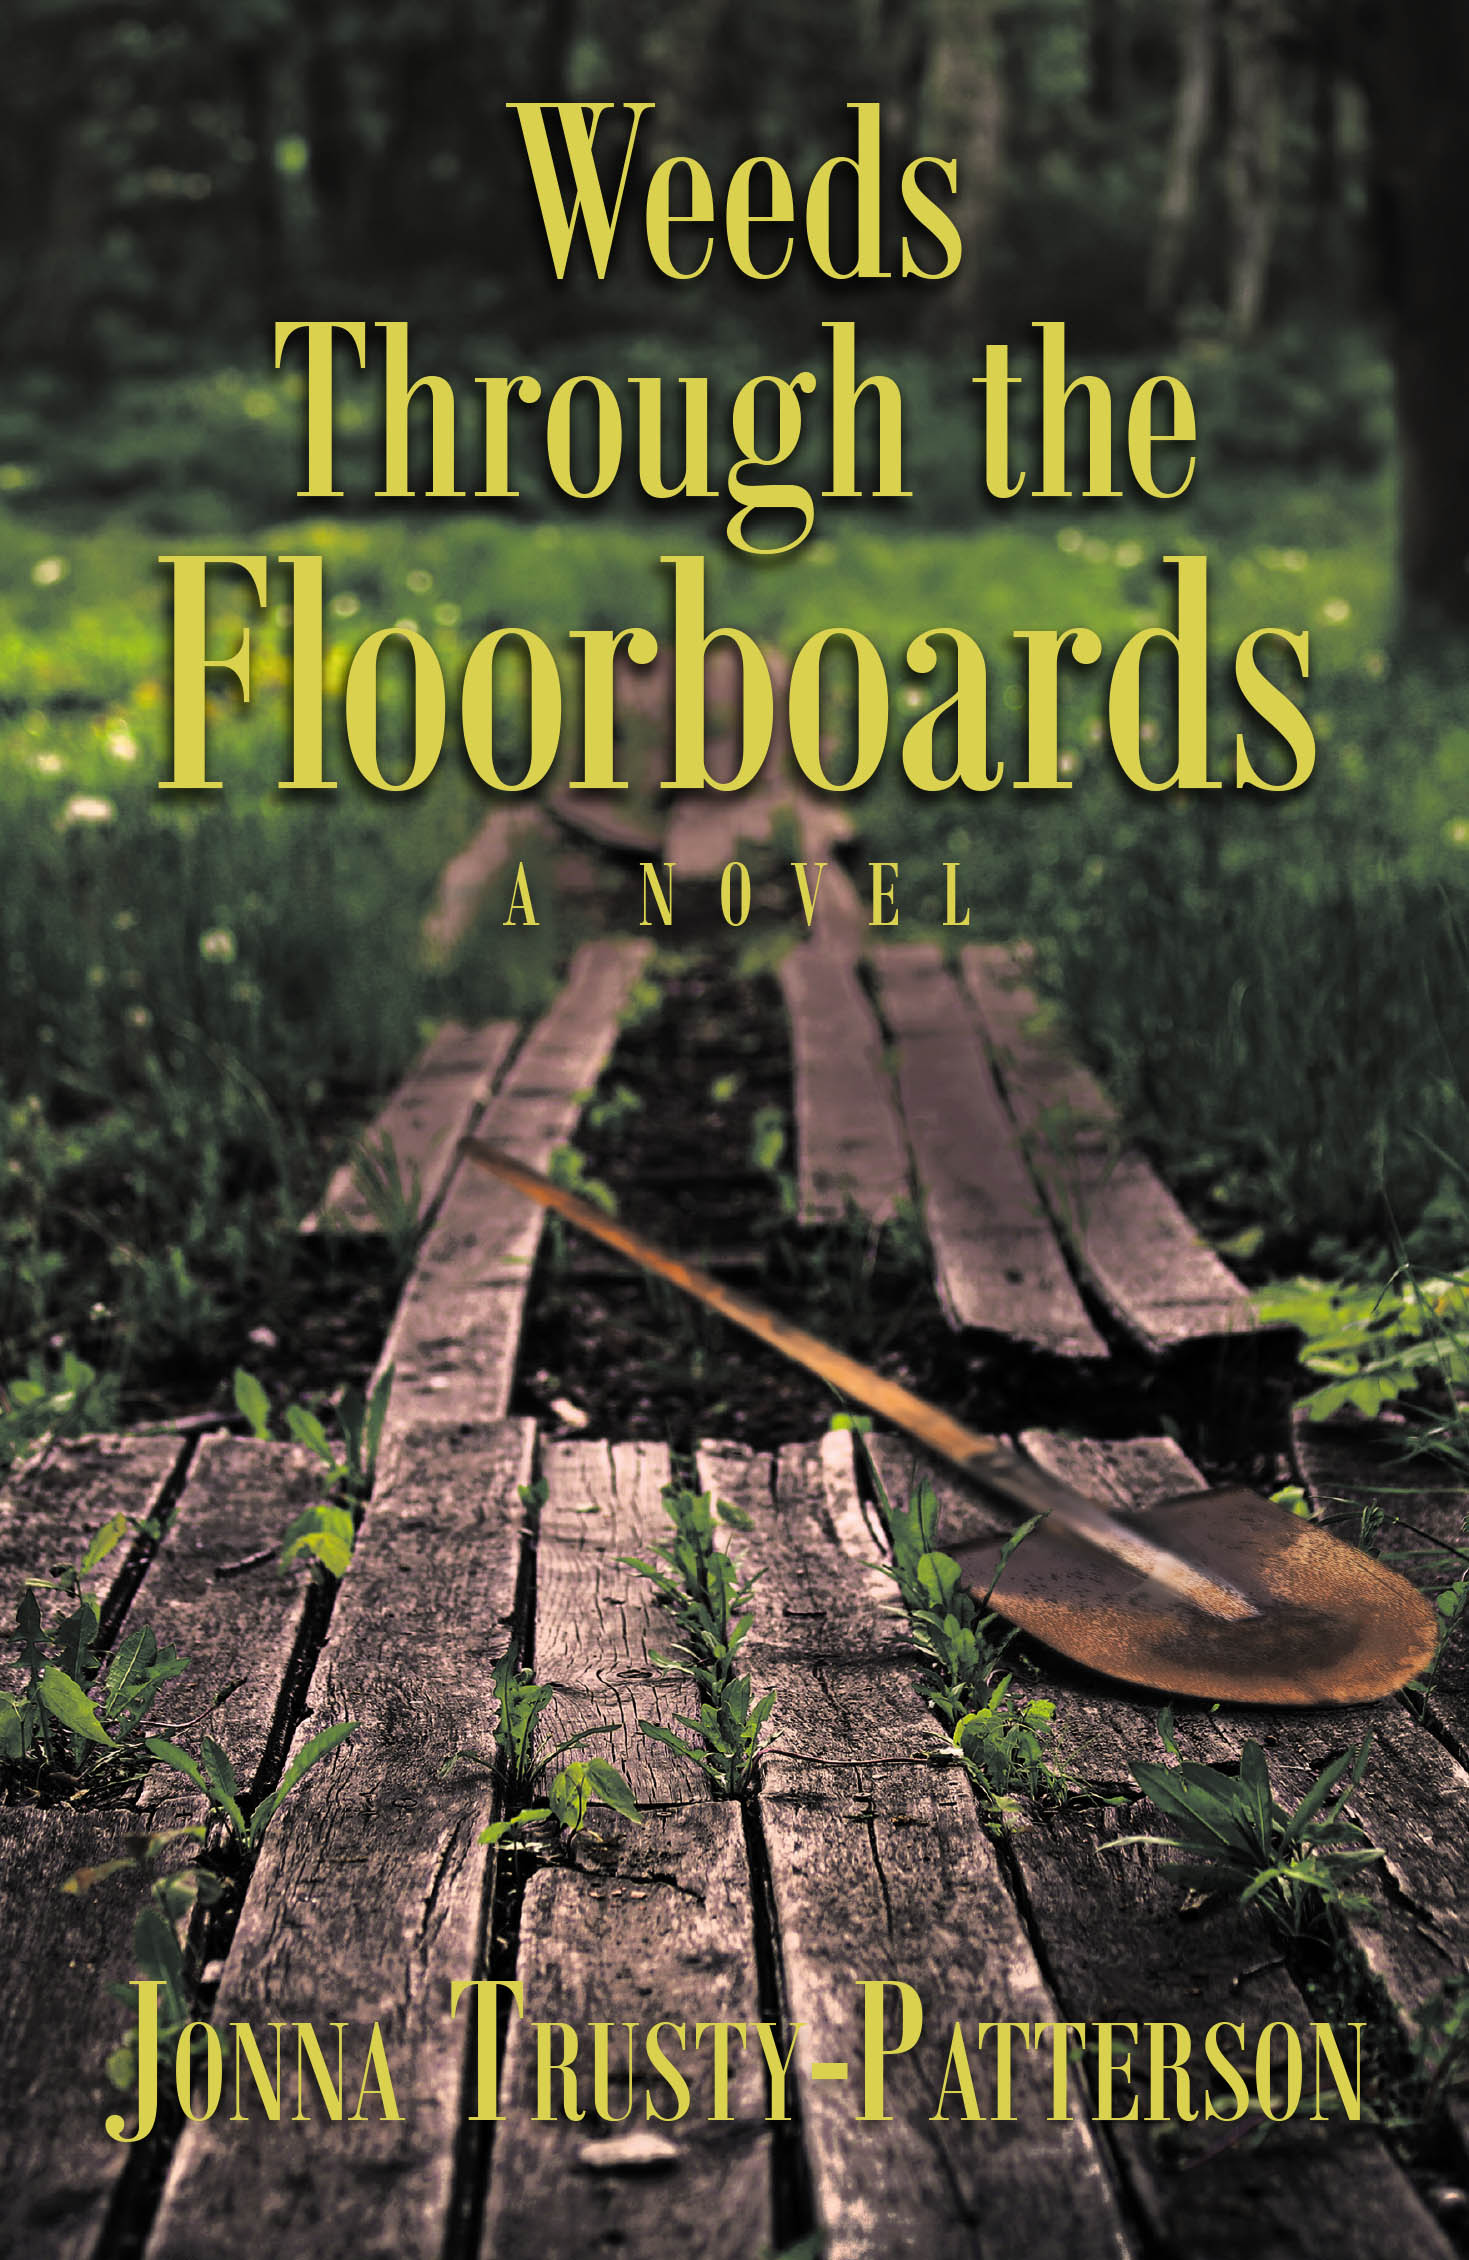 Author Jonna Trusty-Patterson’s New Book, “Weeds Through the Floorboards: A Novel,” Follows One Young Girl’s Search for Acceptance, Love, and Redemption